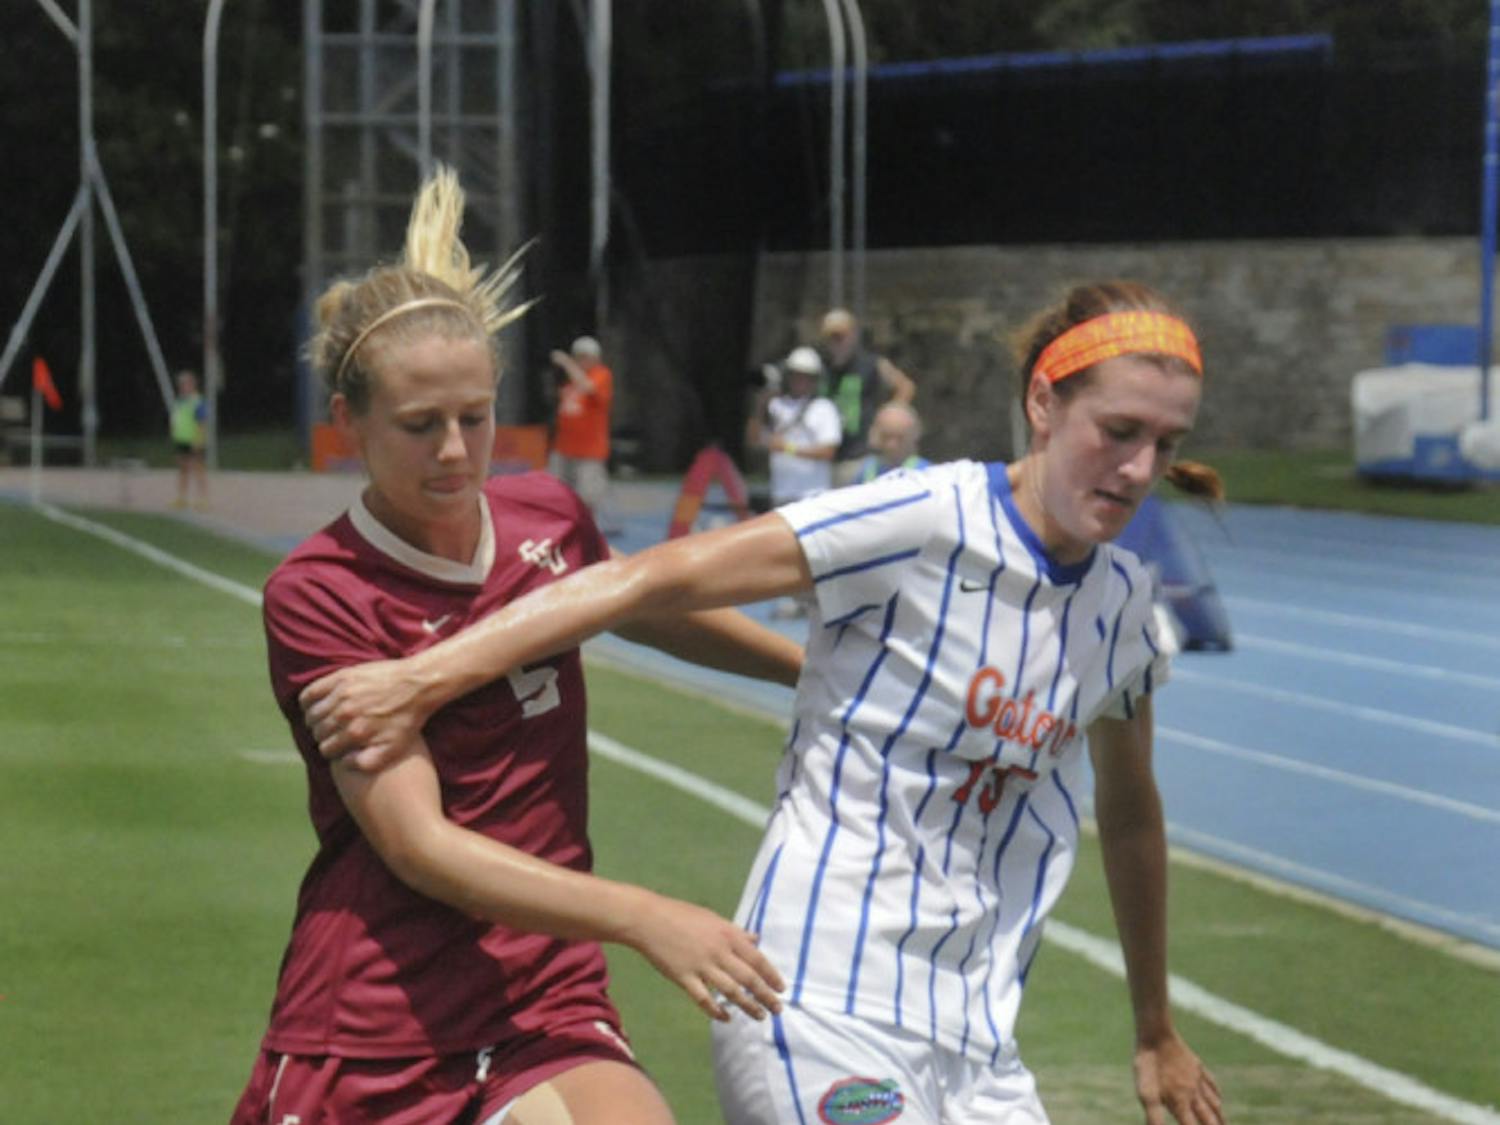 UF's Sarah Troccoli dribbles during Florida's 3-2 win against Florida State on Aug. 30, 2015, at James G. Pressly Stadium.